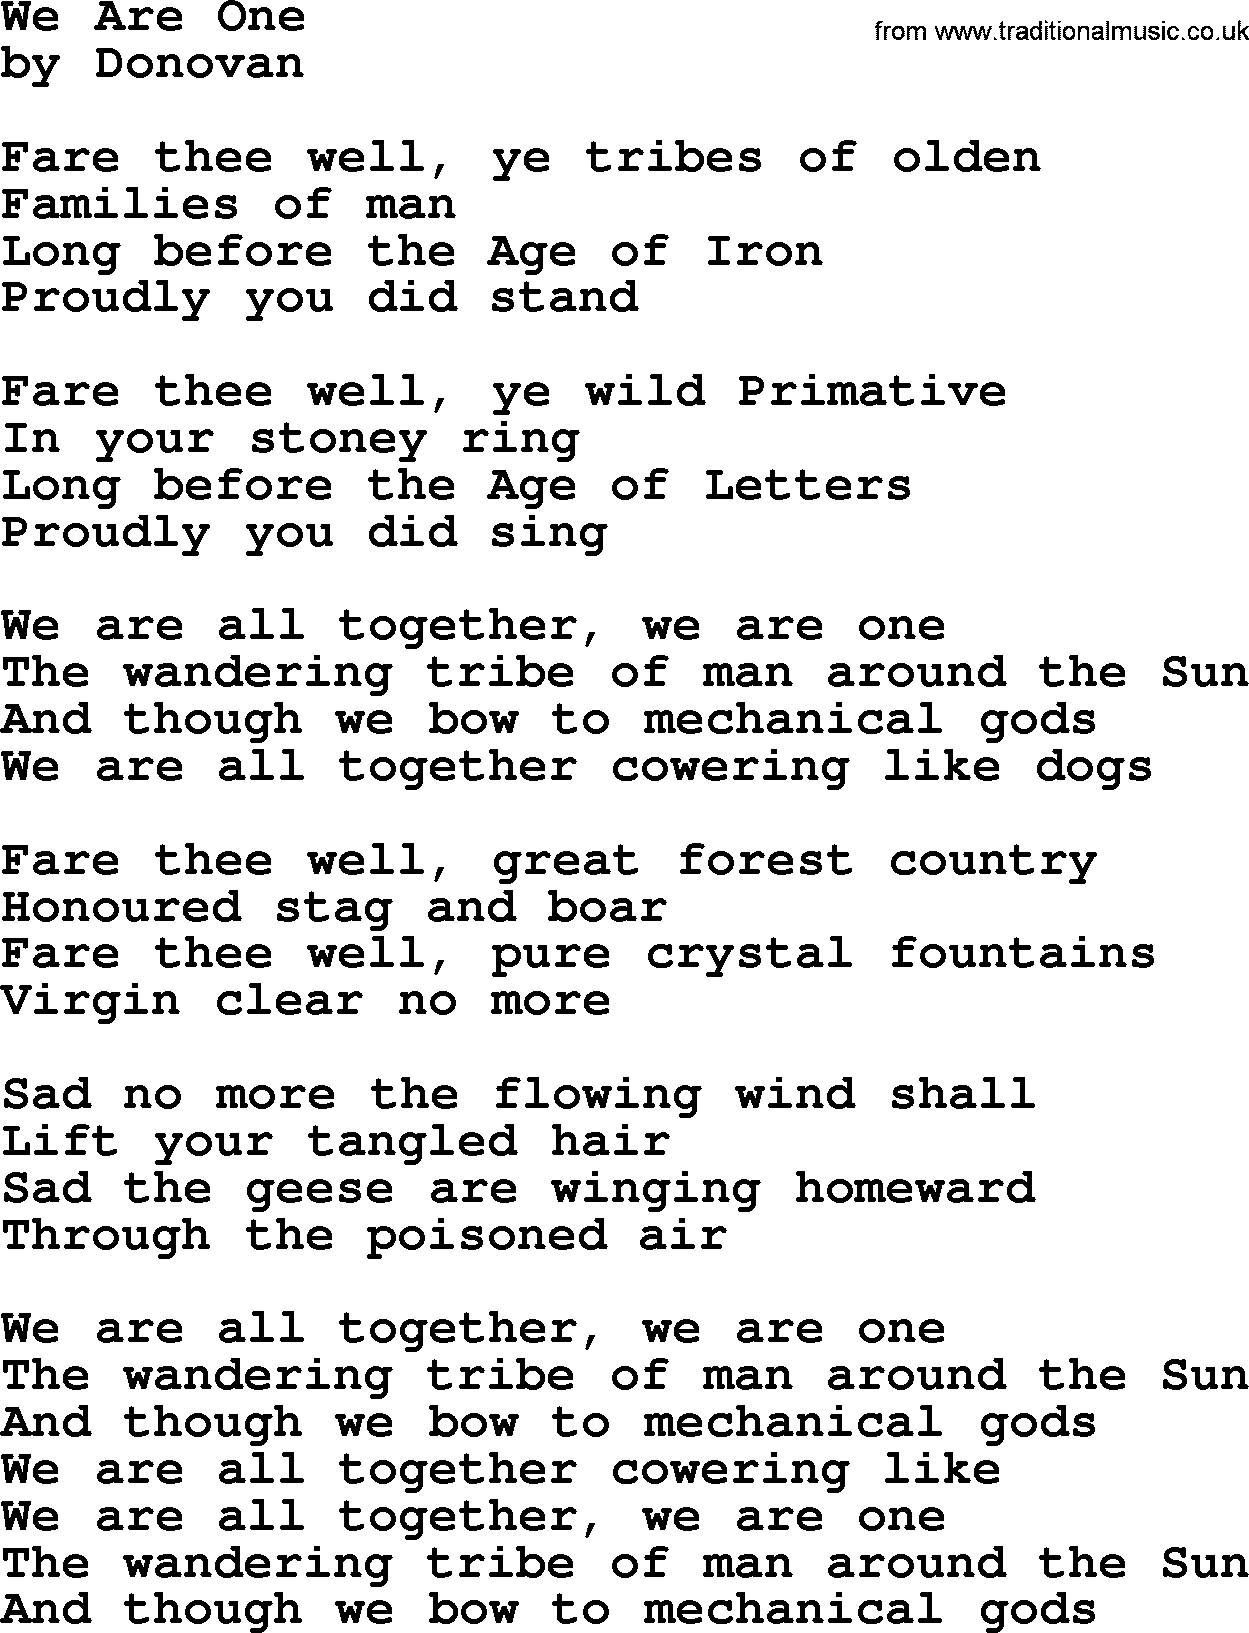 Donovan Leitch song: We Are One lyrics